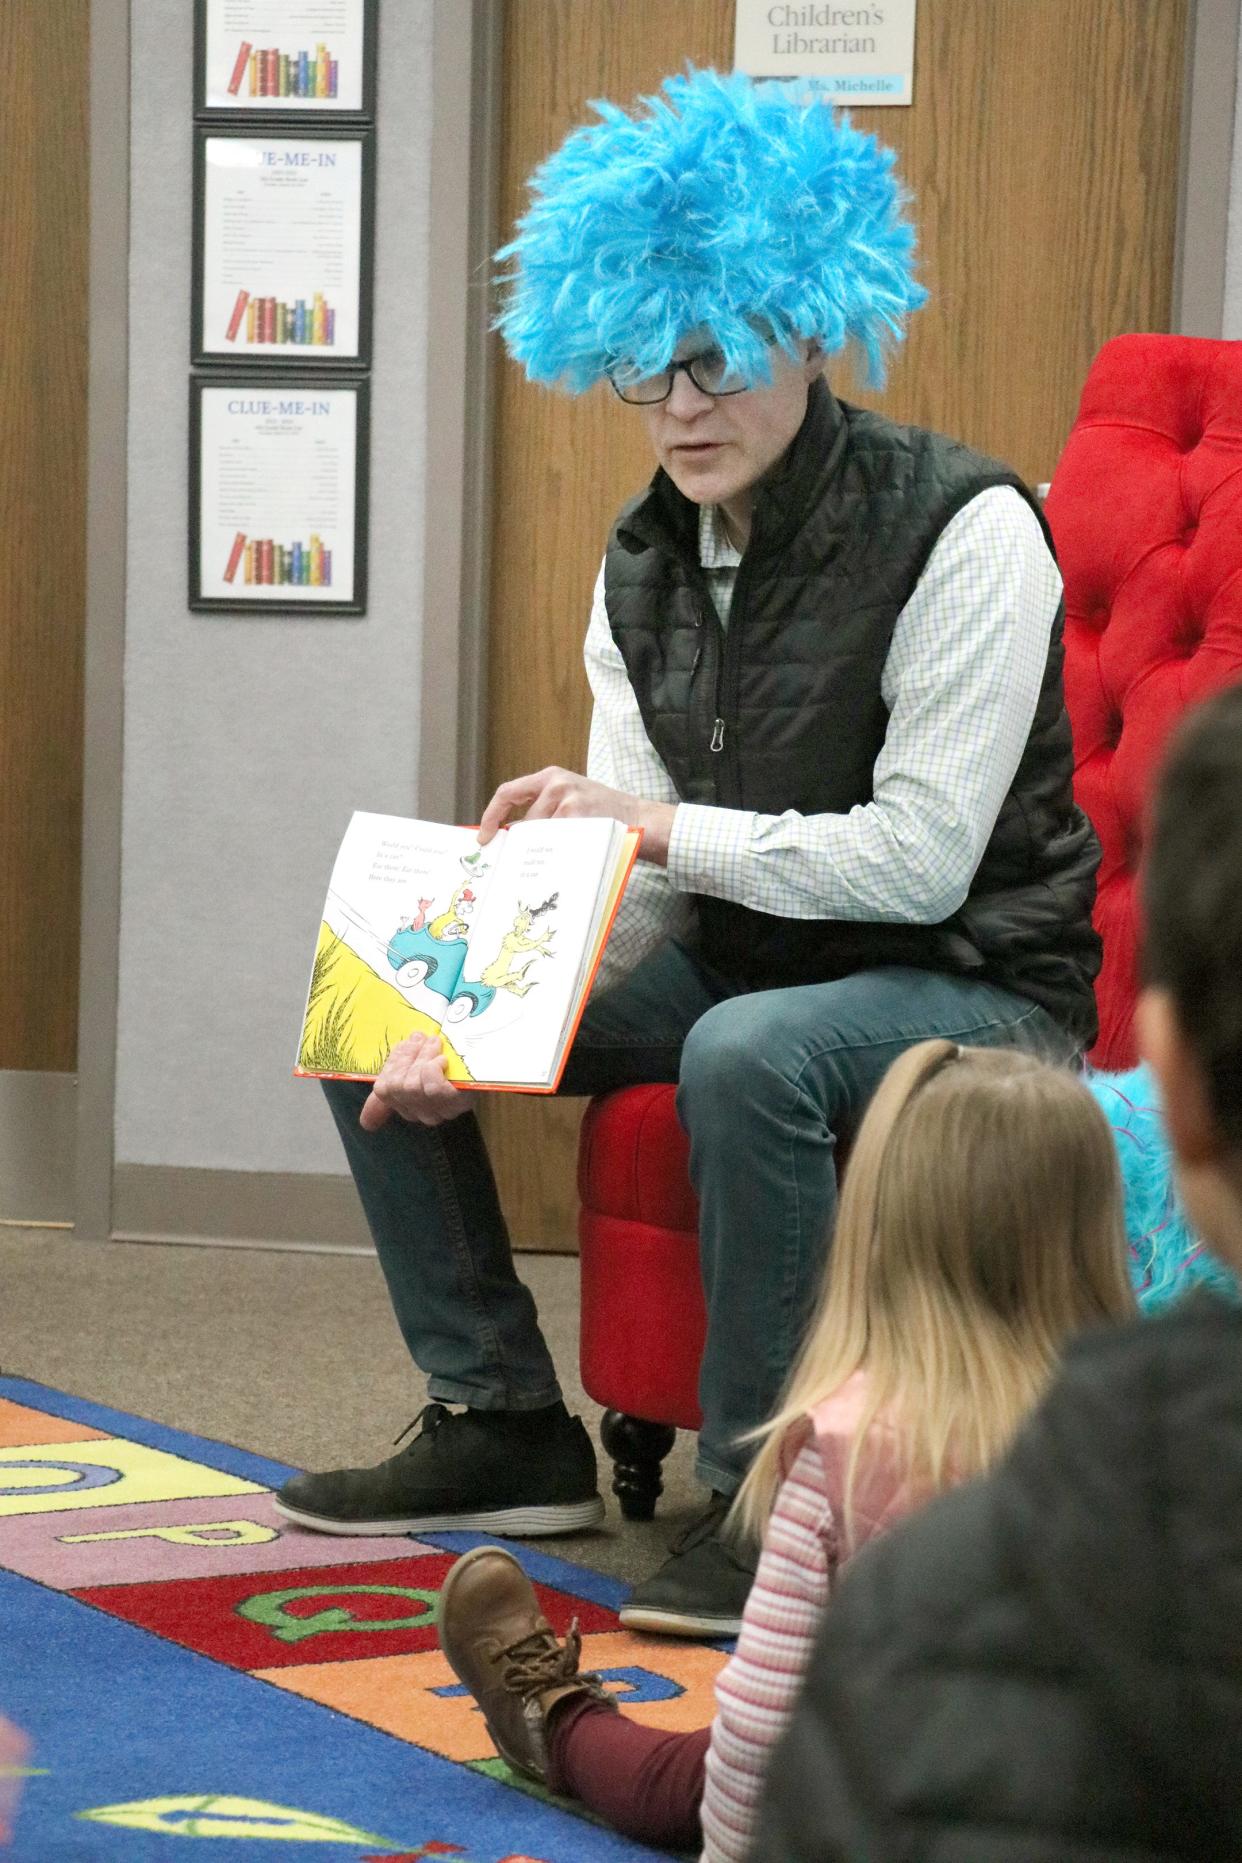 Sturgis Public Schools Superintendent Art Ebert, wearing a blue “Thing” wig, reads a Dr. Seuss book to a group of children gathered at Sturgis District Library.